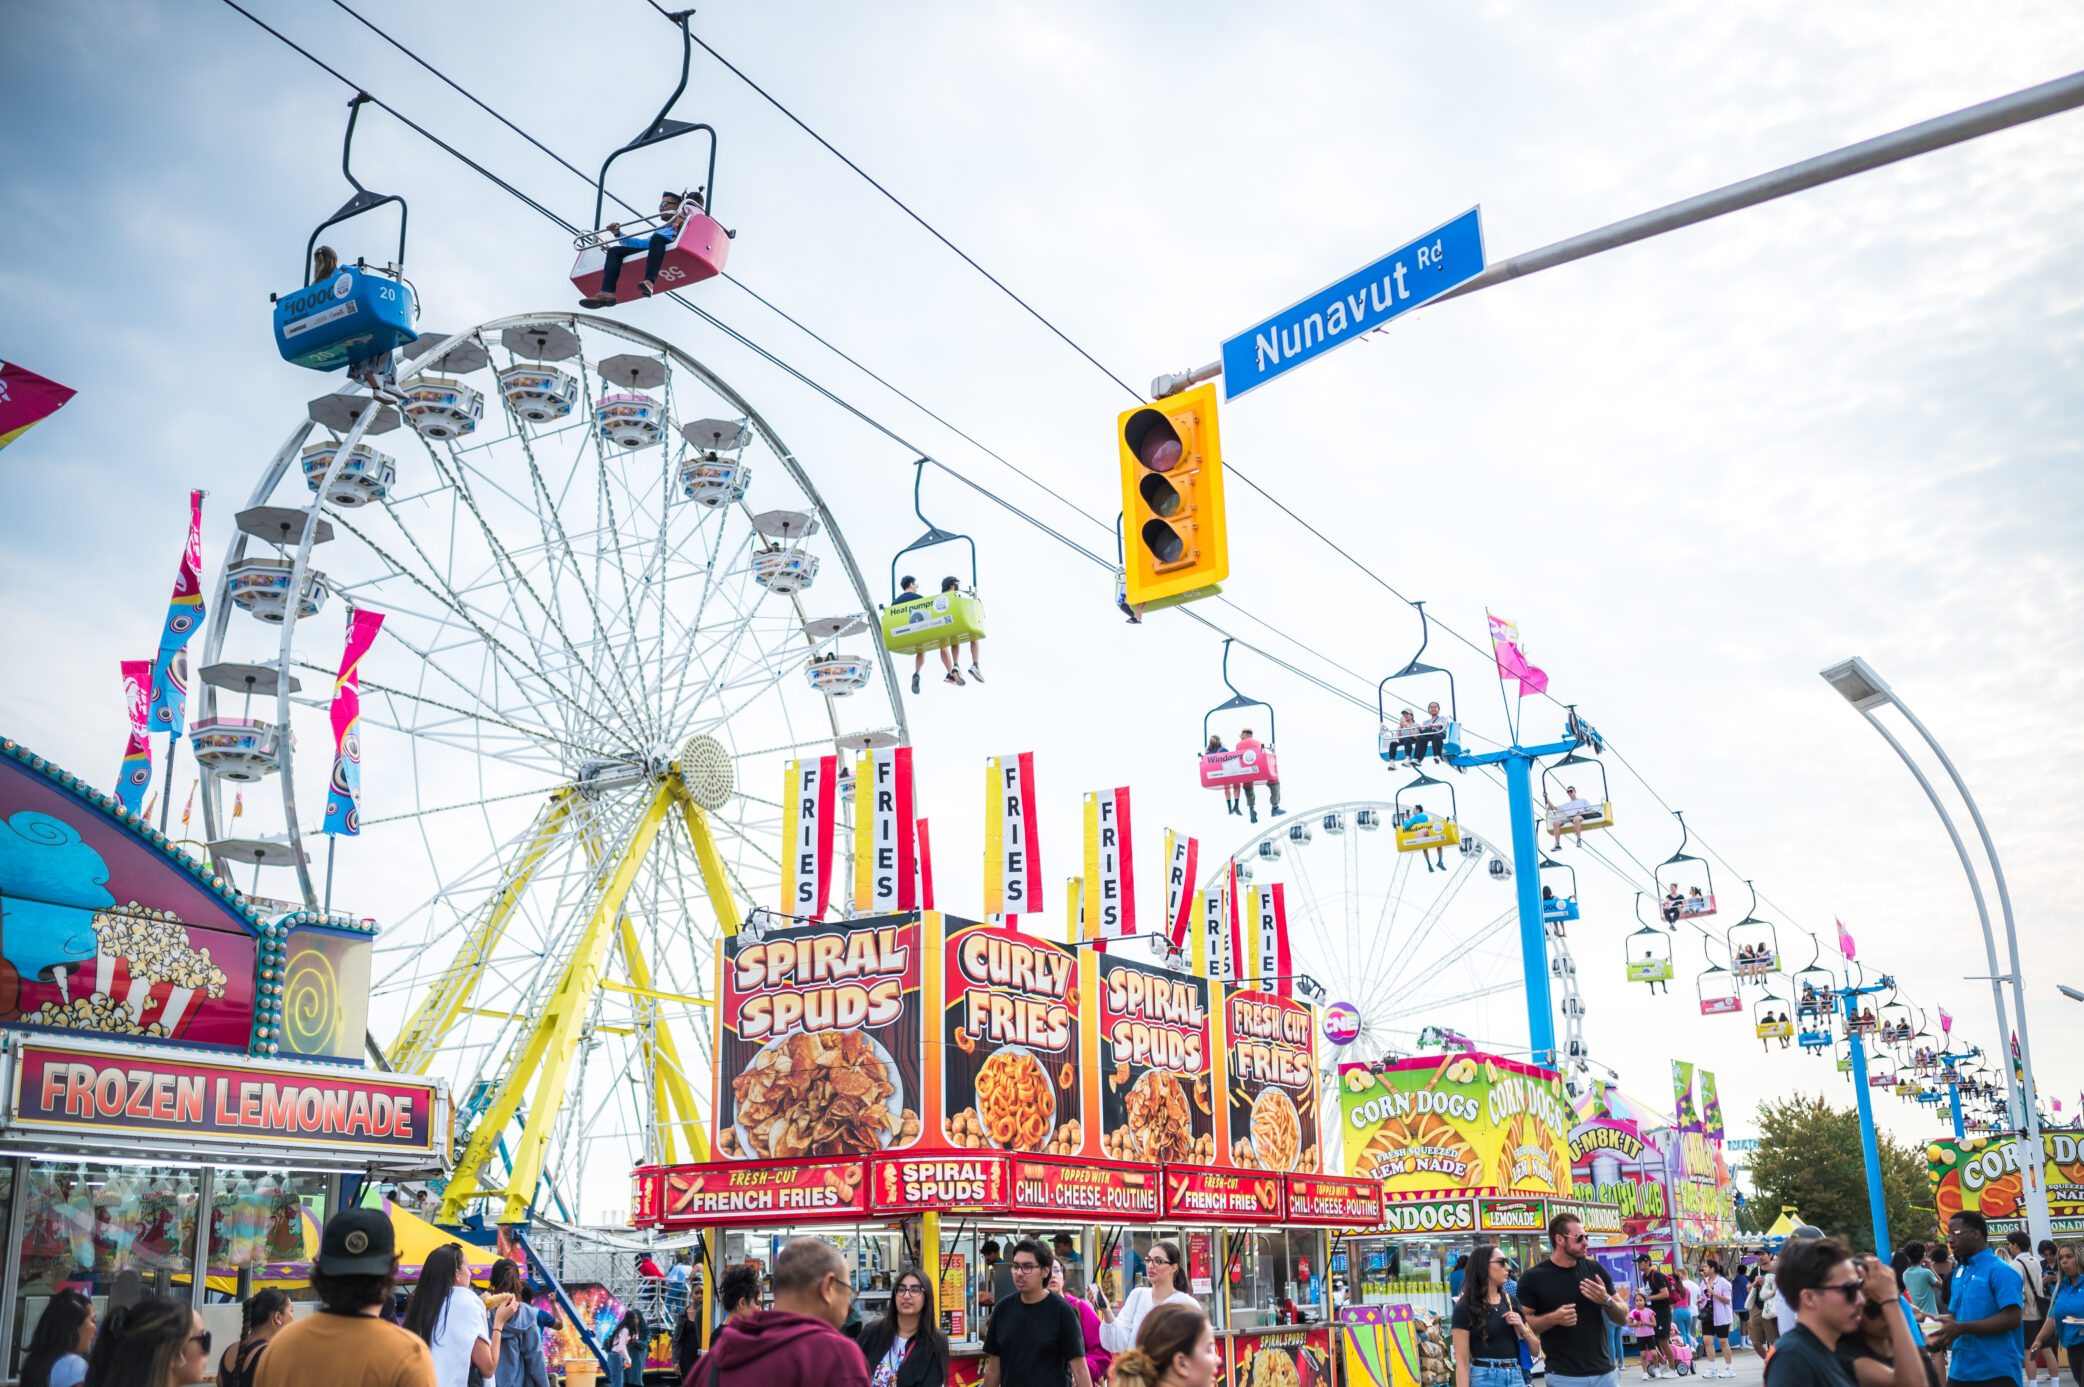 CNE midway during the day with Ferris Wheel in the background.